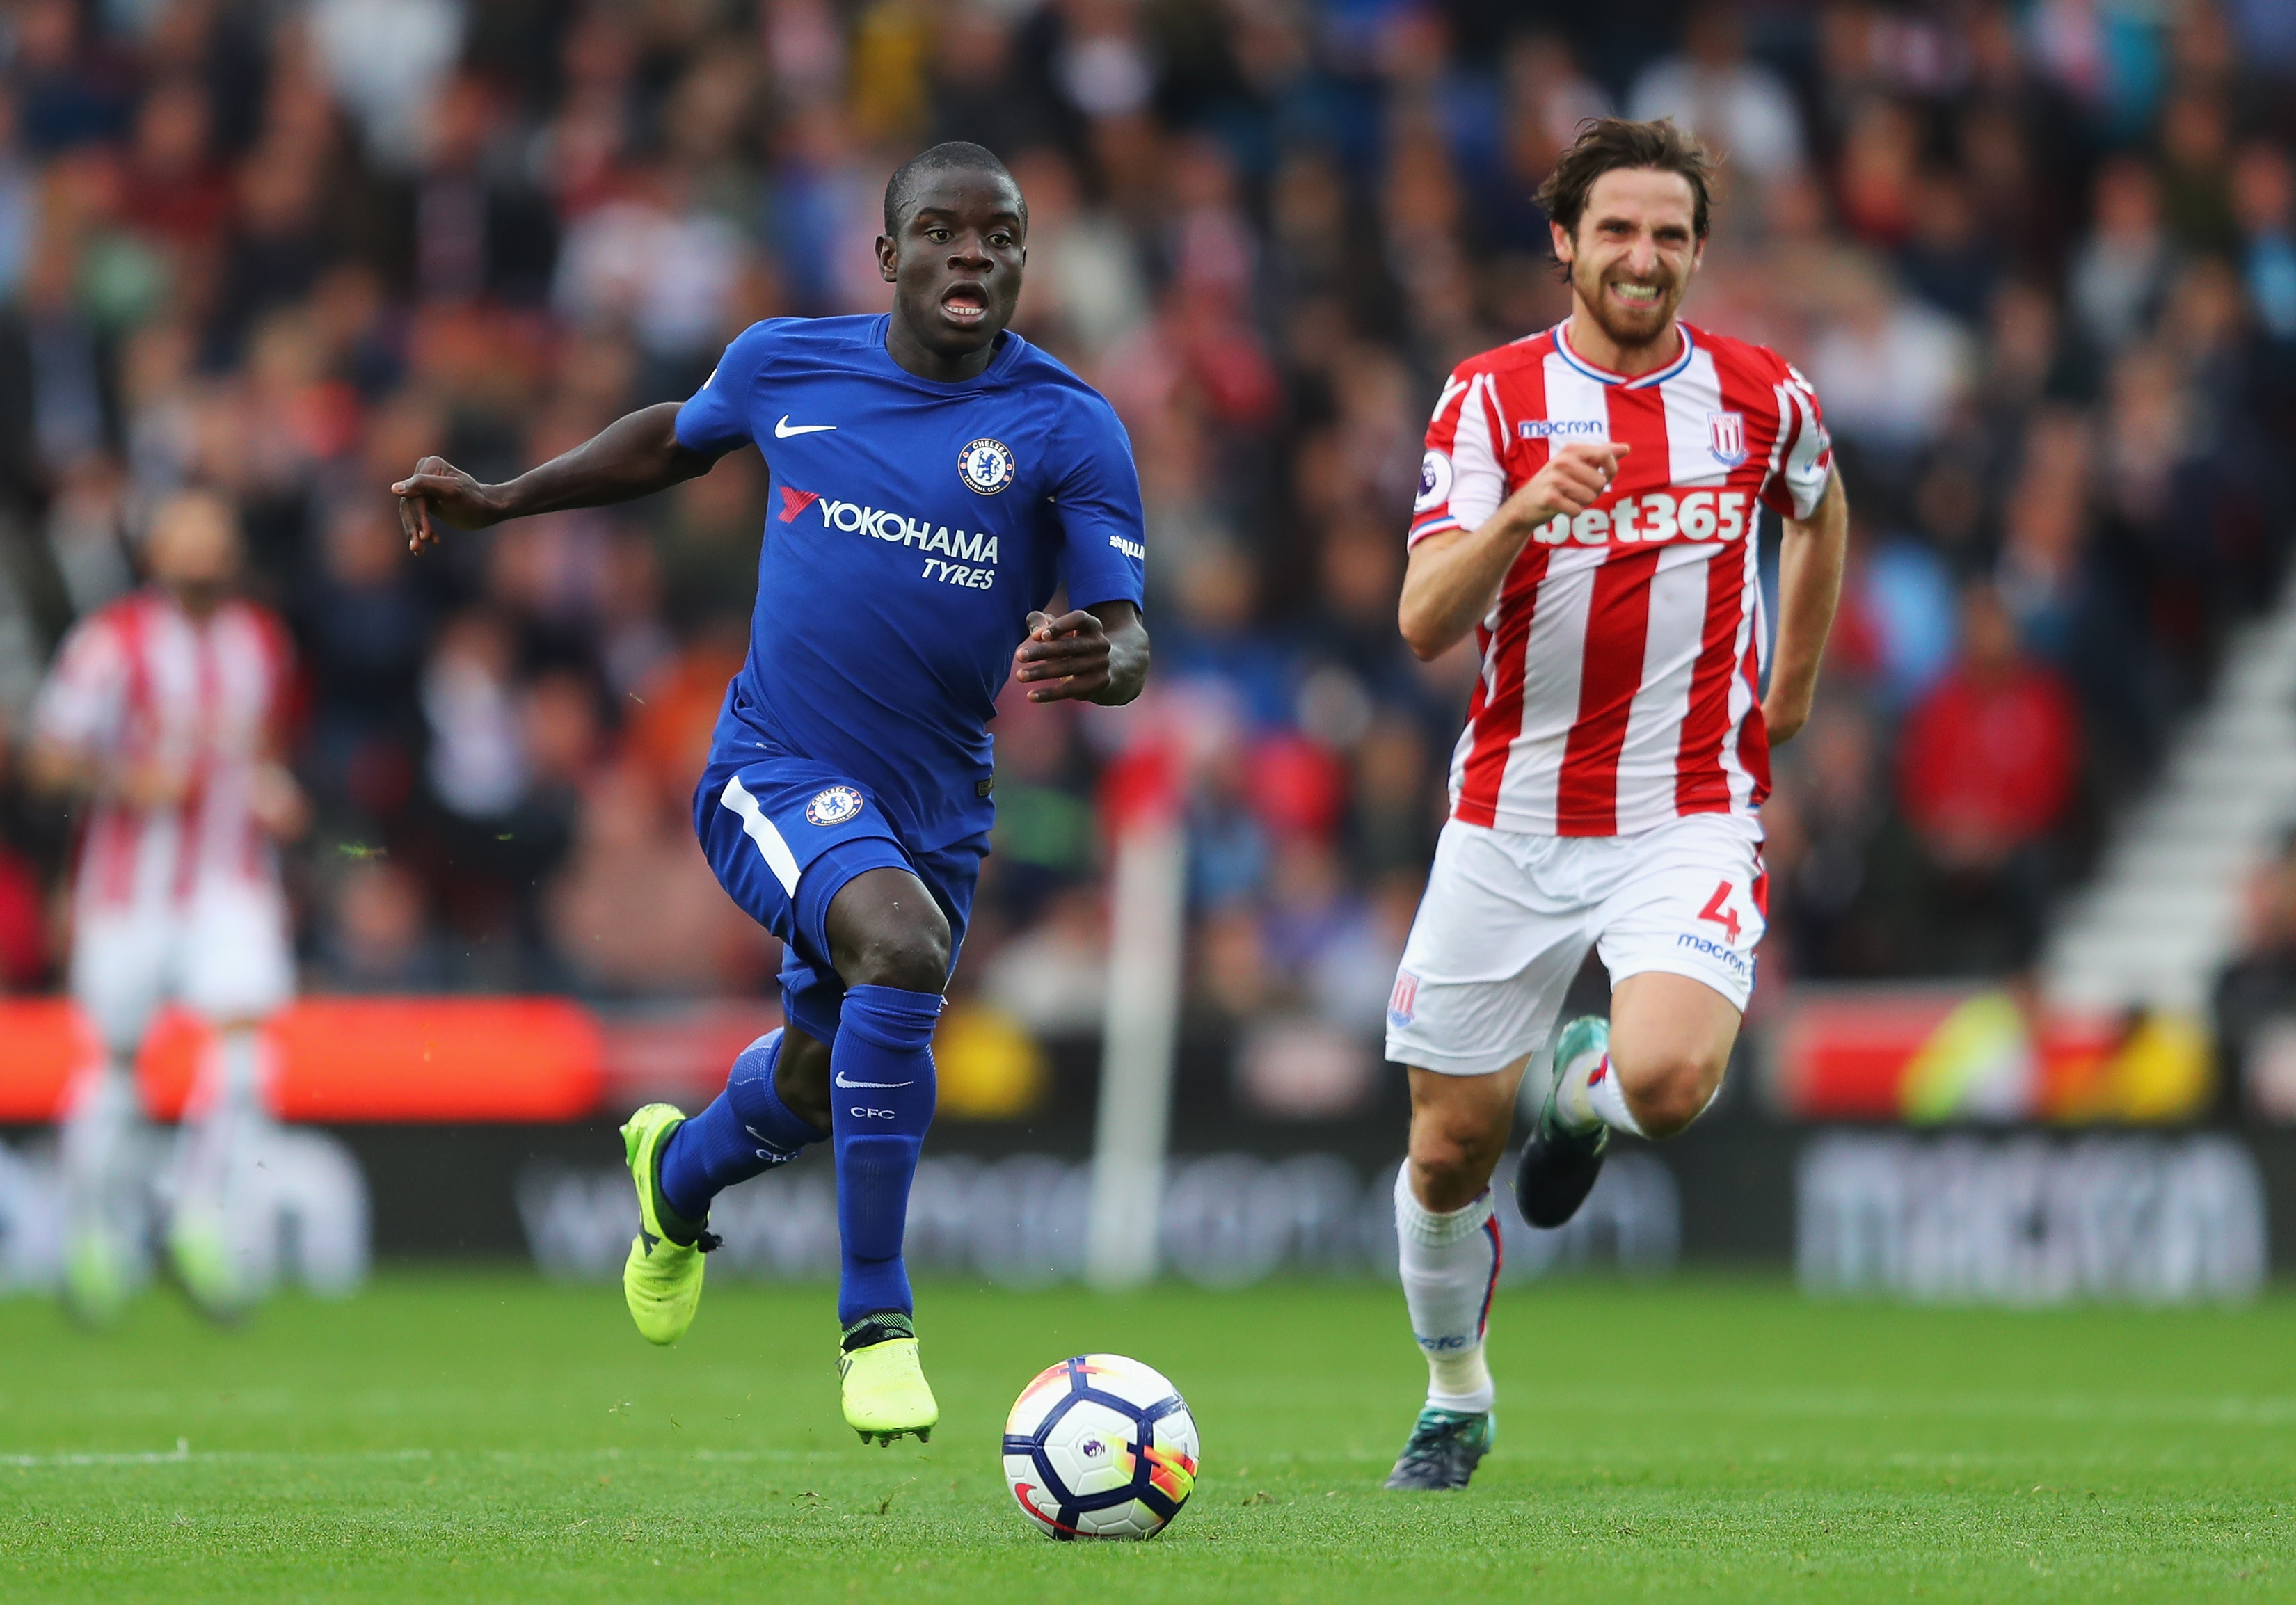 STOKE ON TRENT, ENGLAND - SEPTEMBER 23:  N'Golo Kante of Chelsea in action during the Premier League match between Stoke City and Chelsea at Bet365 Stadium on September 23, 2017 in Stoke on Trent, England.  (Photo by Richard Heathcote/Getty Images)